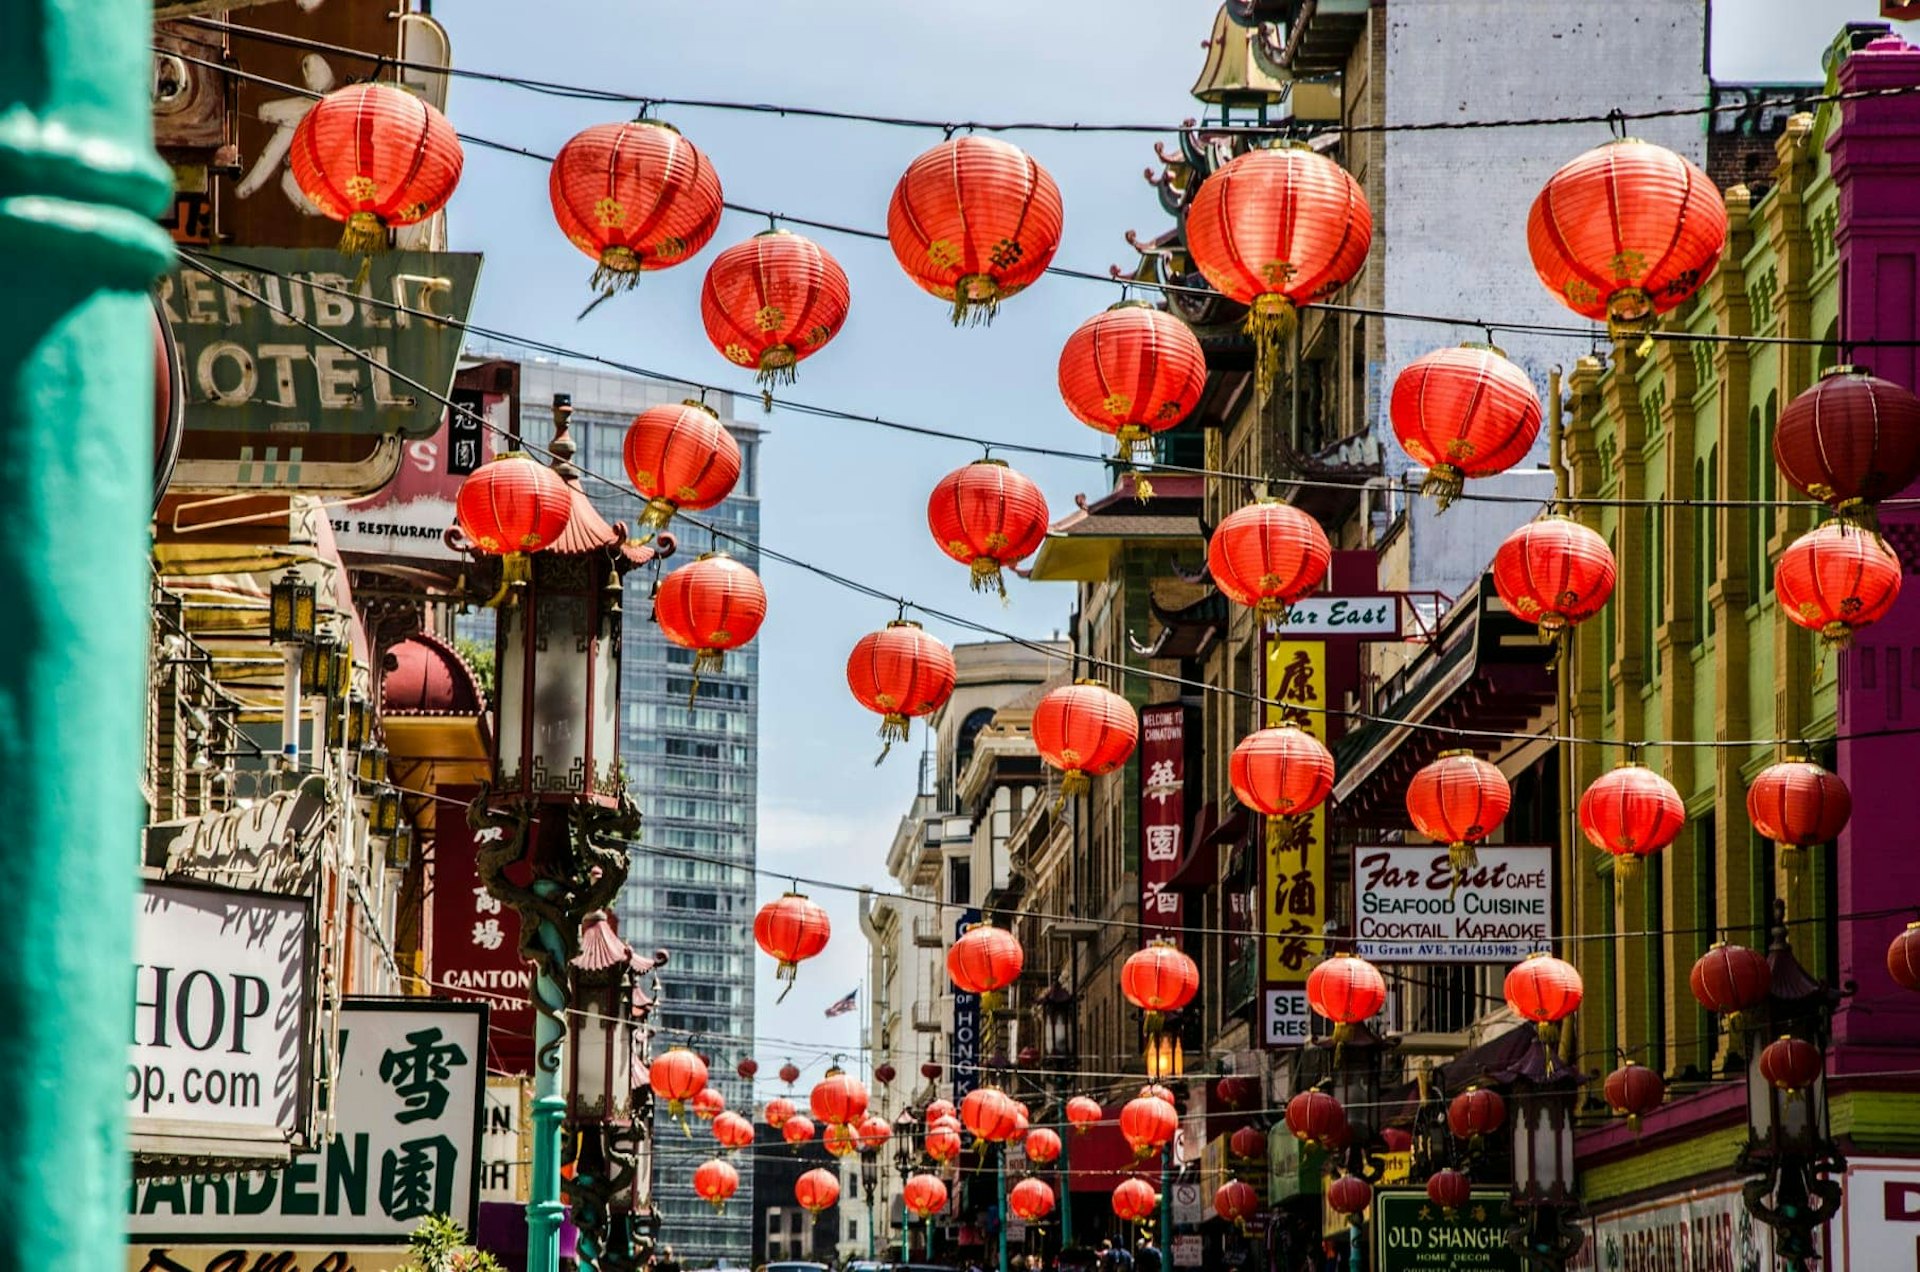 Bulbs hanging from the street in Chinatown, San Francisco